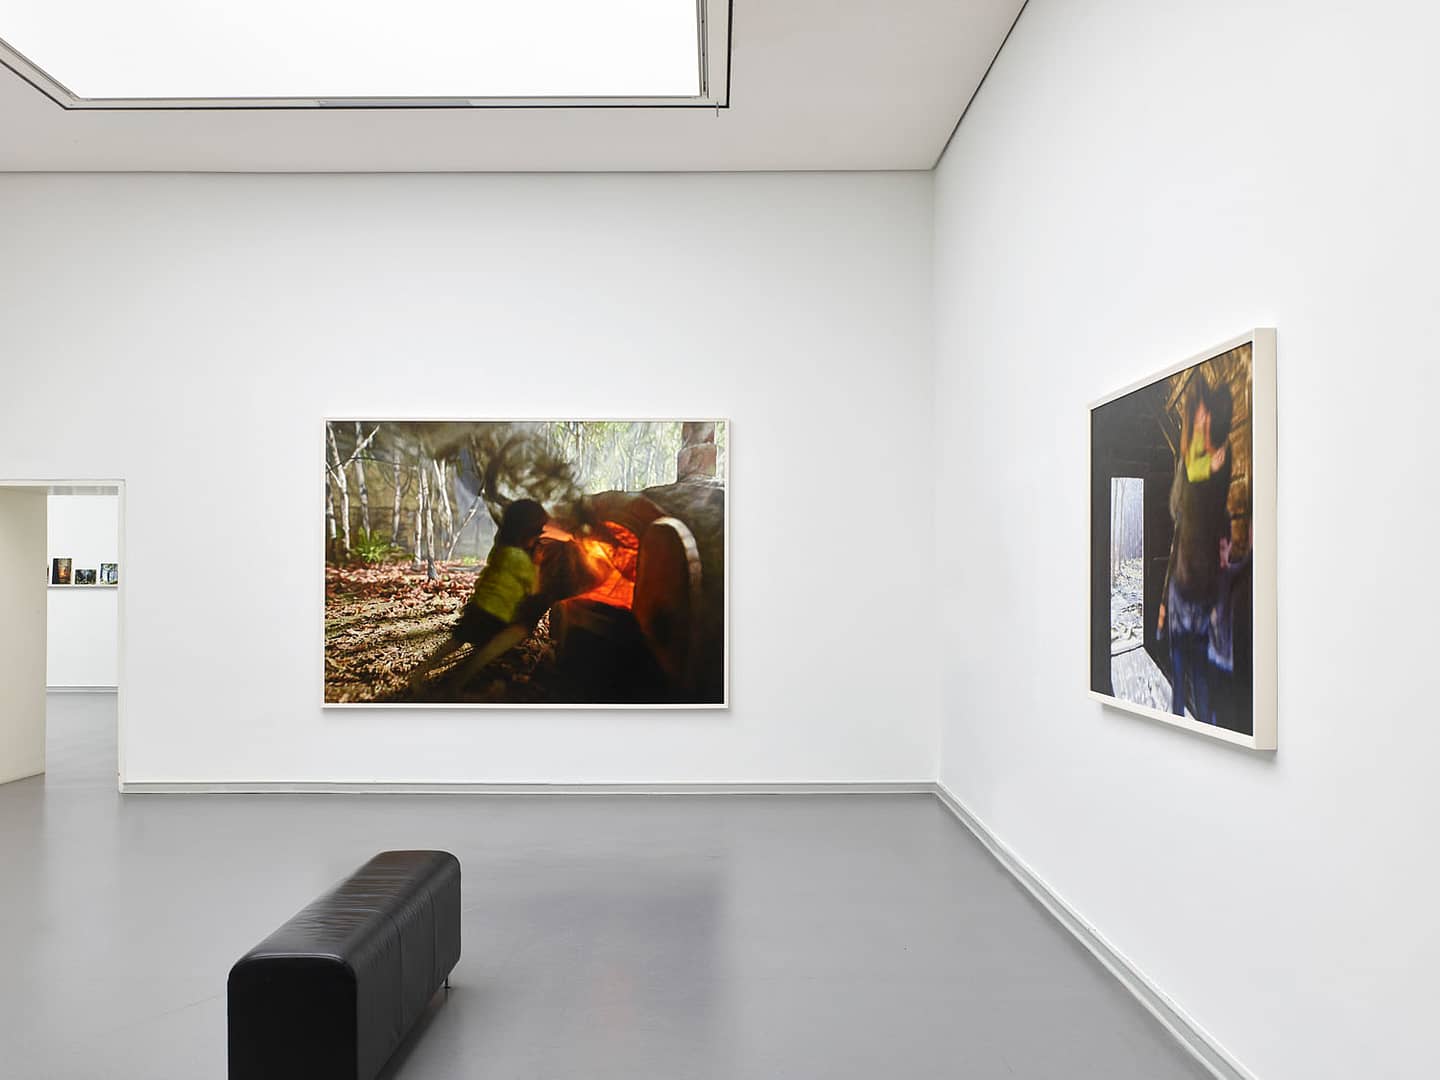 Exhibition view of Philipp Fröhlich's solo show Märchen at Von der Heydt Kunsthalle Barmen, produced by Kunst- und Museumsverein Wuppertal. The image shows two paintings from Philipp Fröhlich's cycle on Hänsel and Gretel by the brothers Grimm.